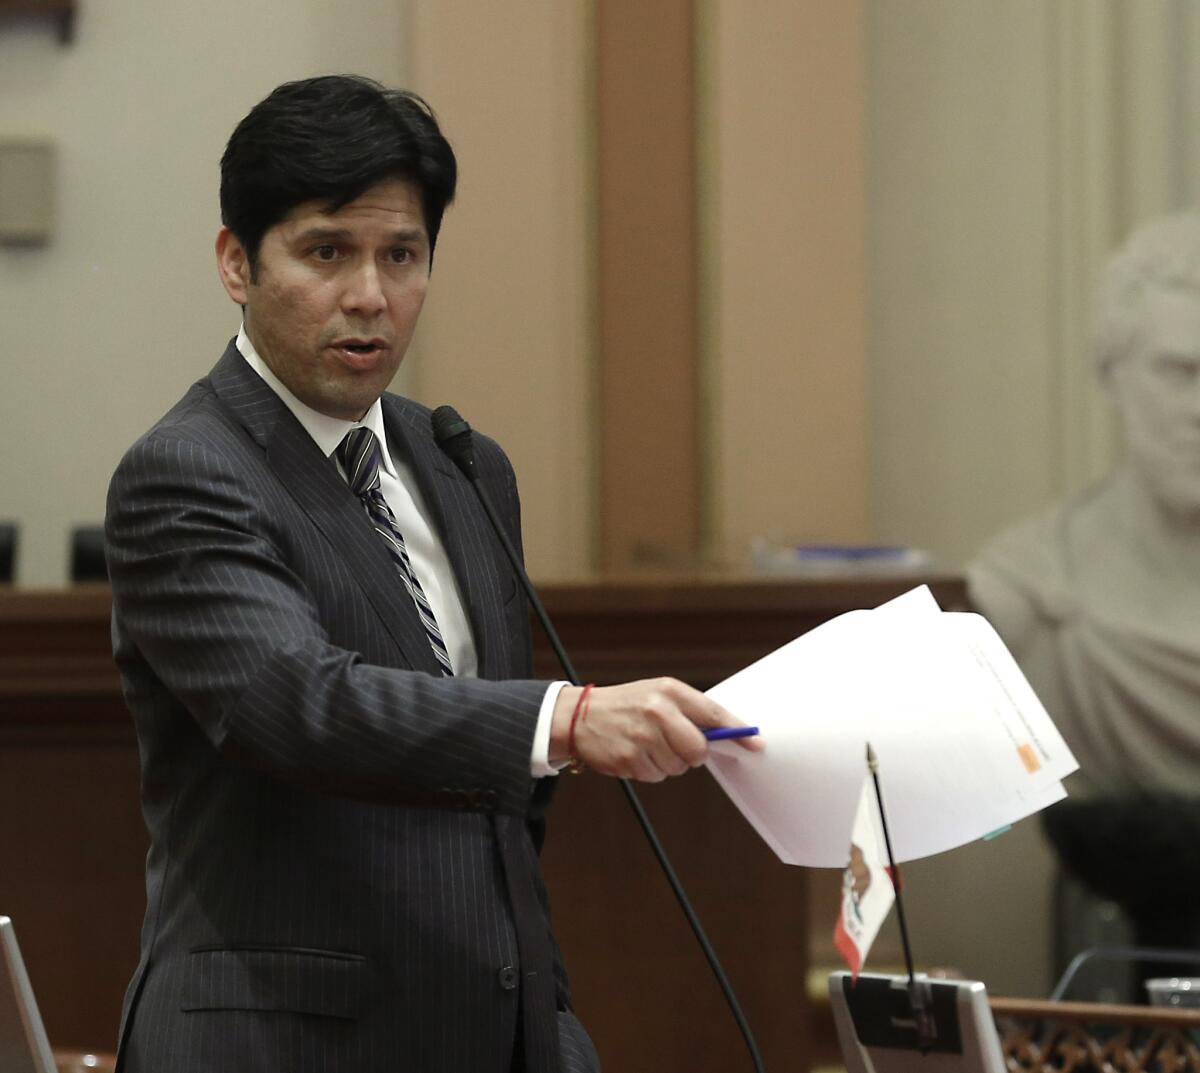 Sen. Kevin de Leon (D-Los Angeles), shown speaking on a bill before the Senate, is expected to become the next president pro tem of the Senate, current leader Darrell Steinberg said Tuesday.